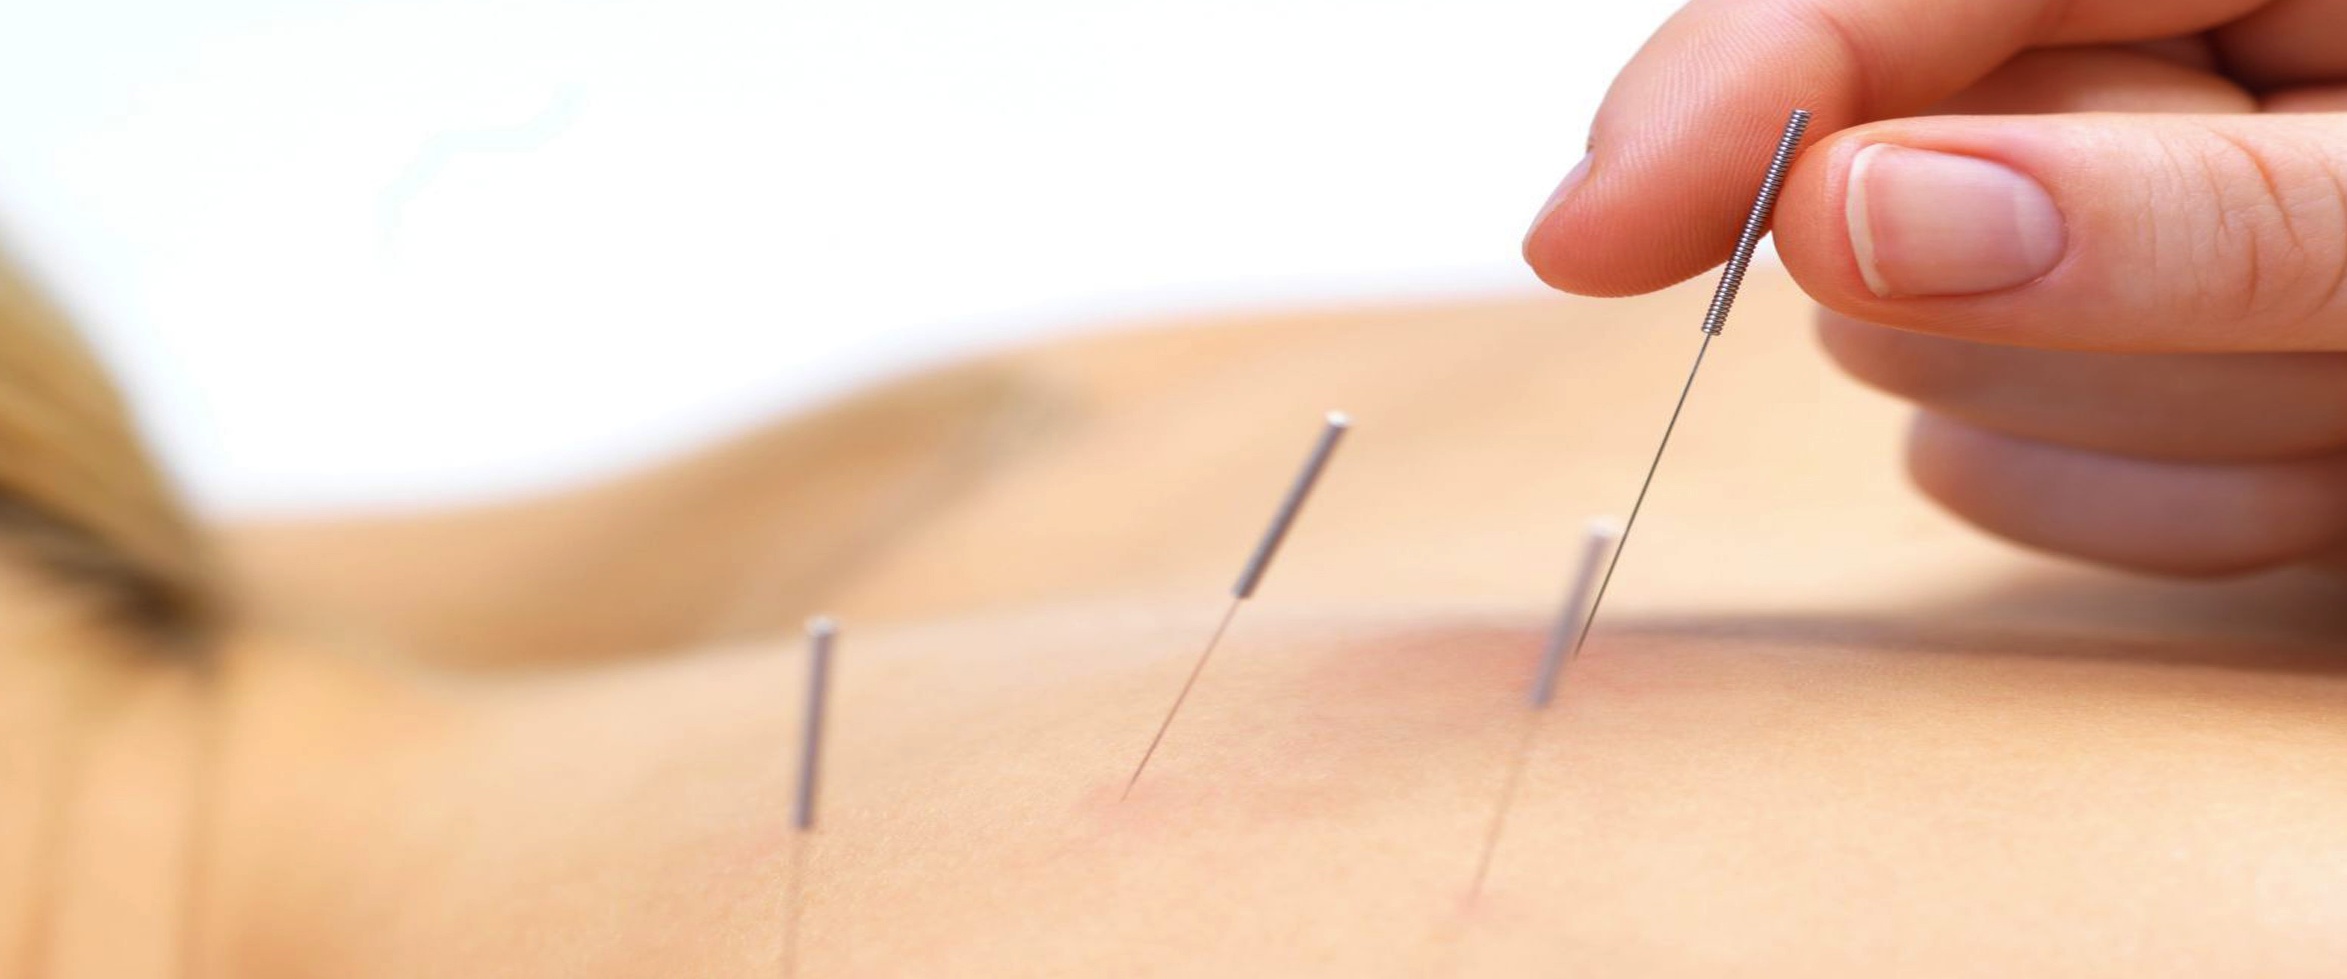 acupuncture-back-on-track-physio